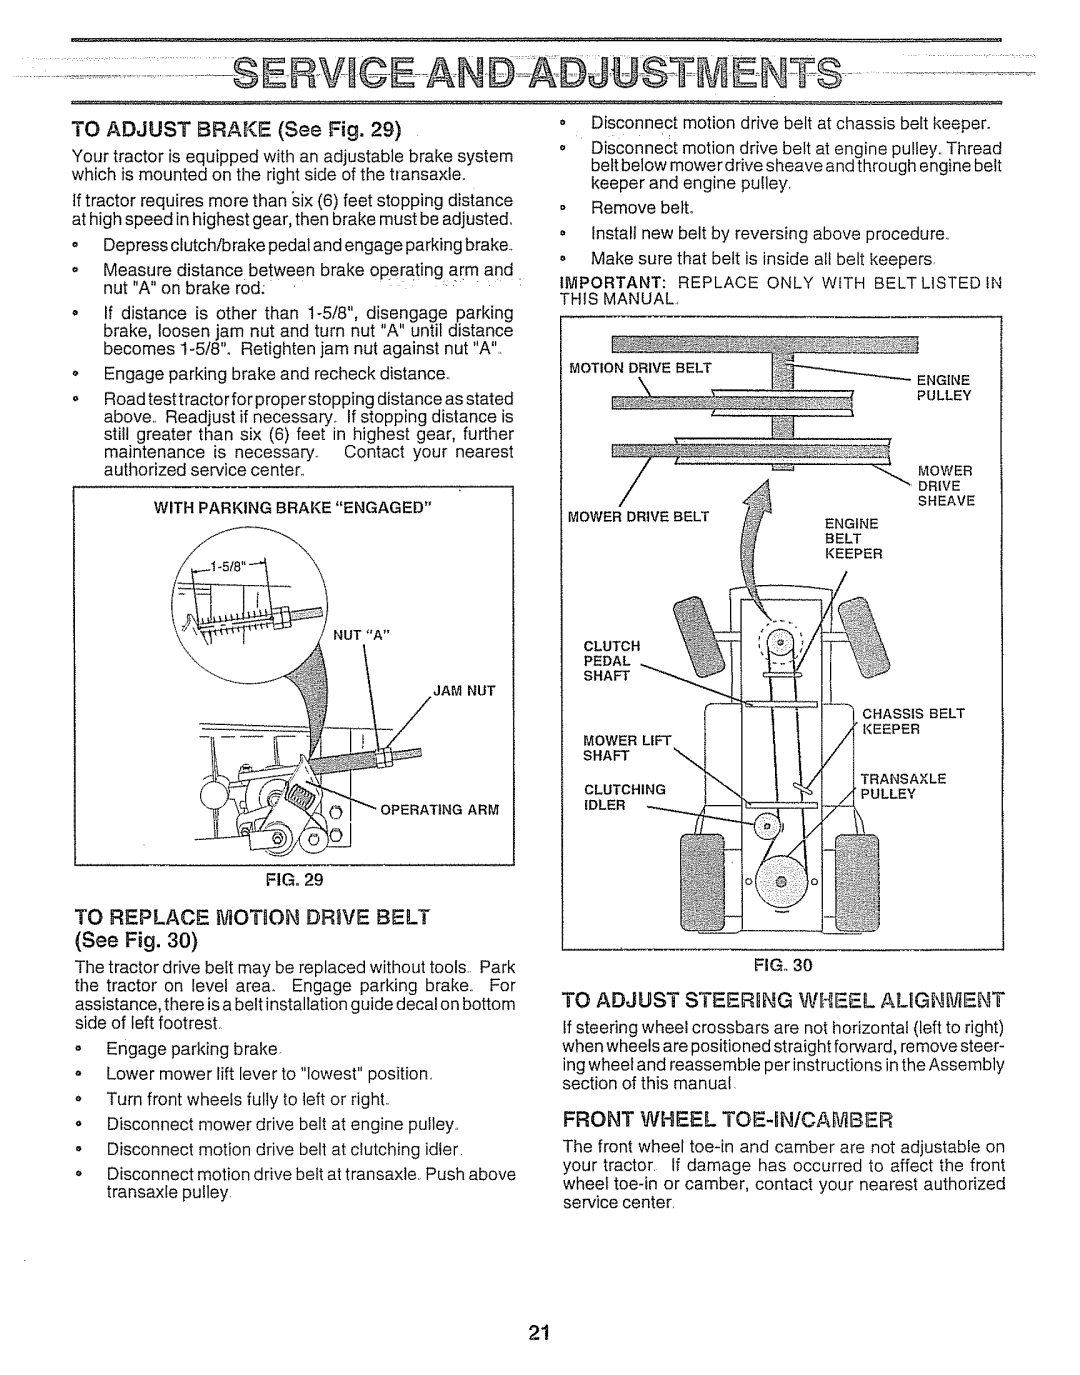 Craftsman 917.25693 owner manual R.V AID D:jU:ITIE-NTI, TO ADJUST BRAKE See Fig, TO REPLACE MOTION DRBVE BELT See Fig 